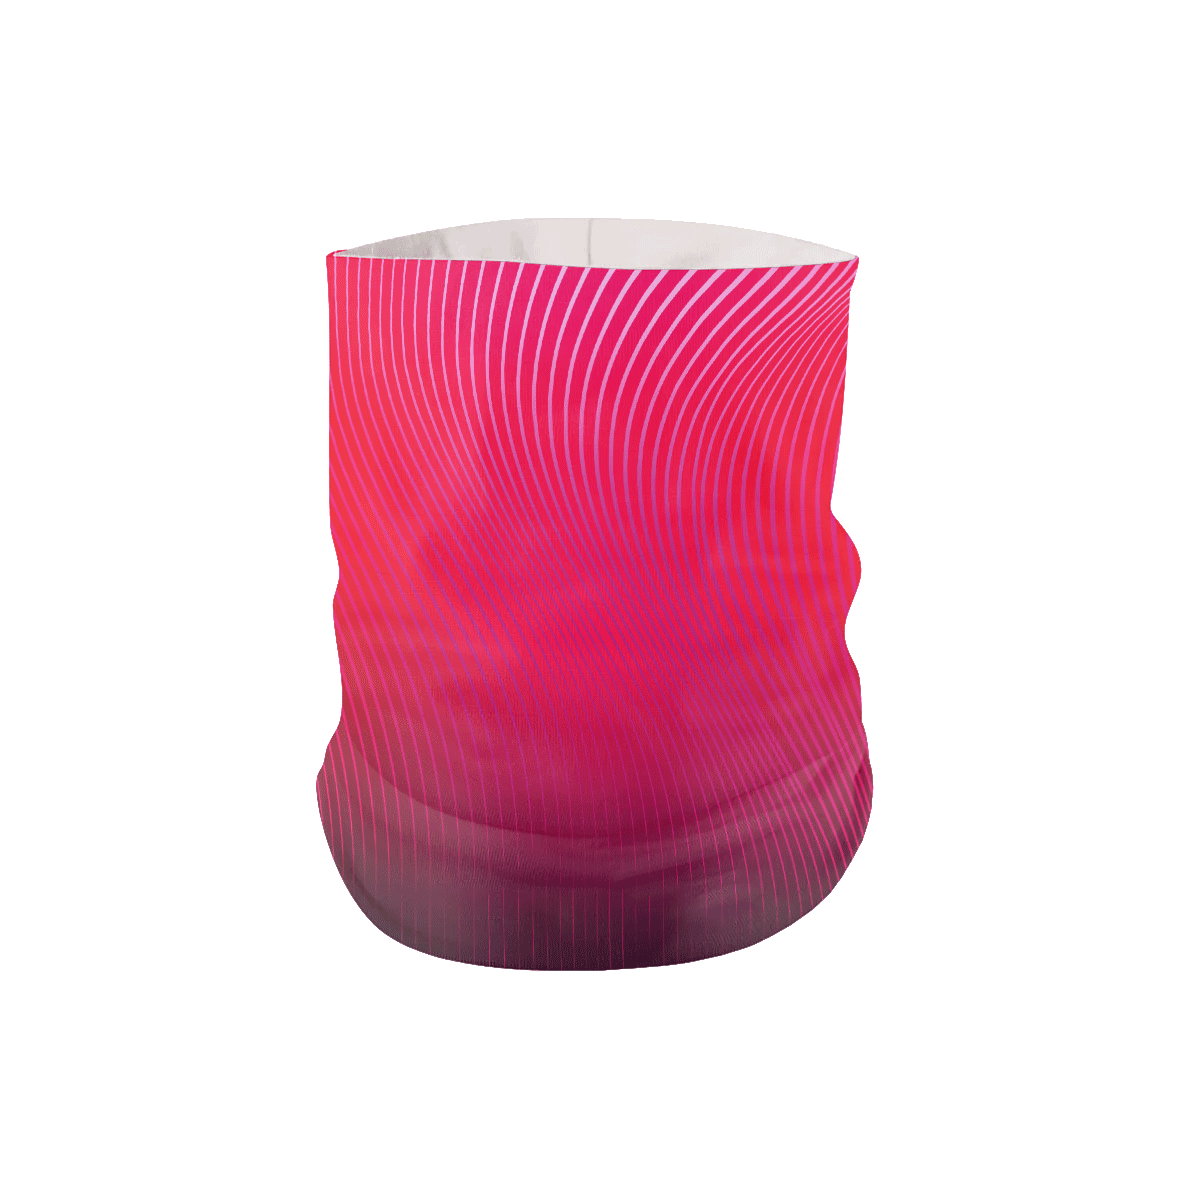 Cycling buff PINK FLOW image 1